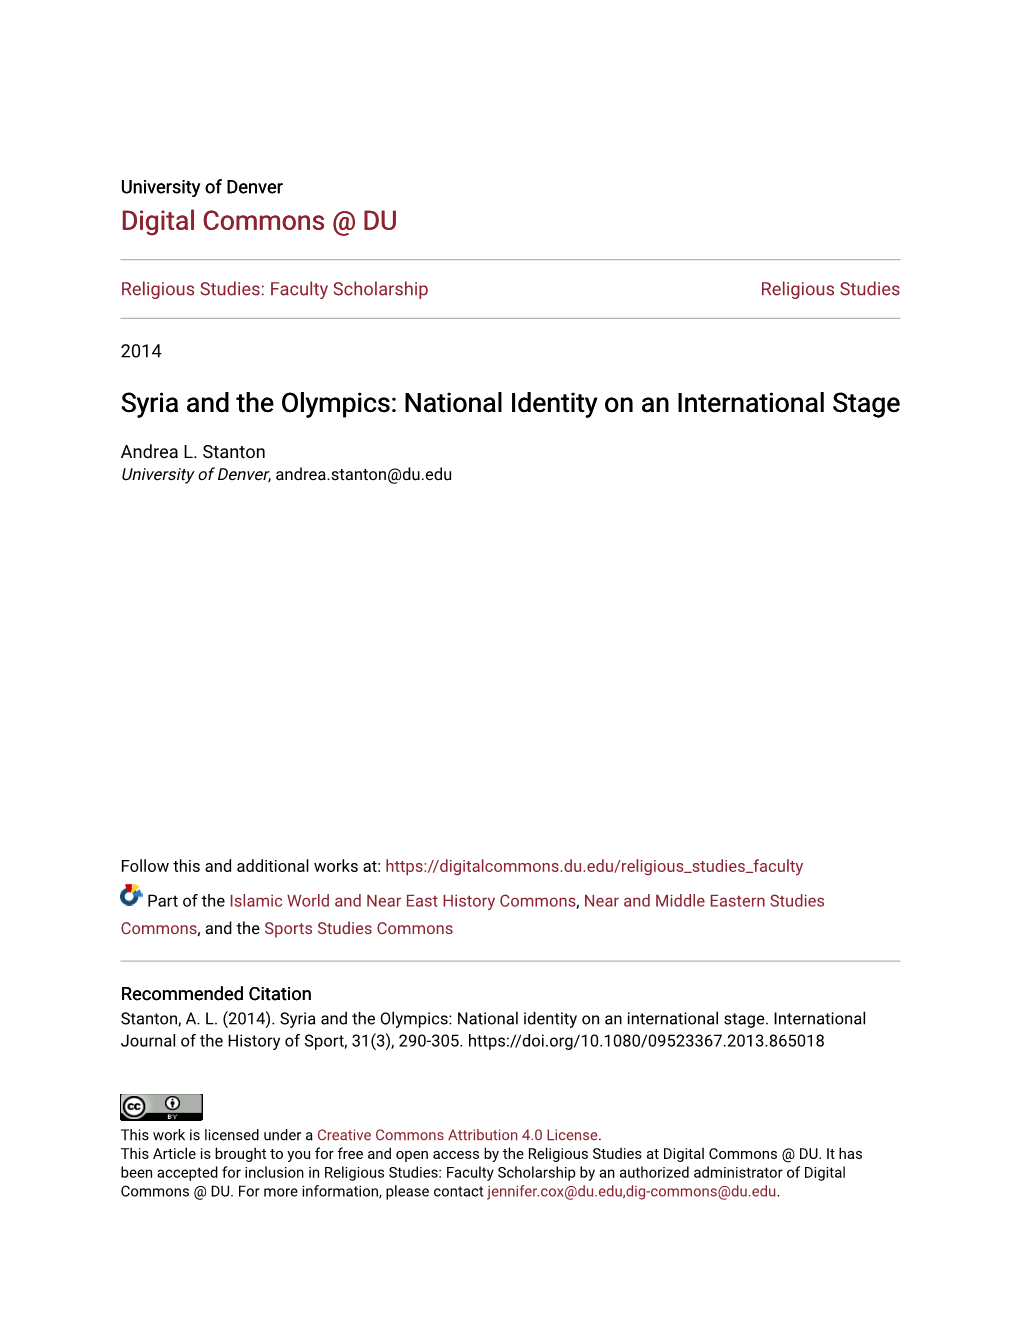 Syria and the Olympics: National Identity on an International Stage